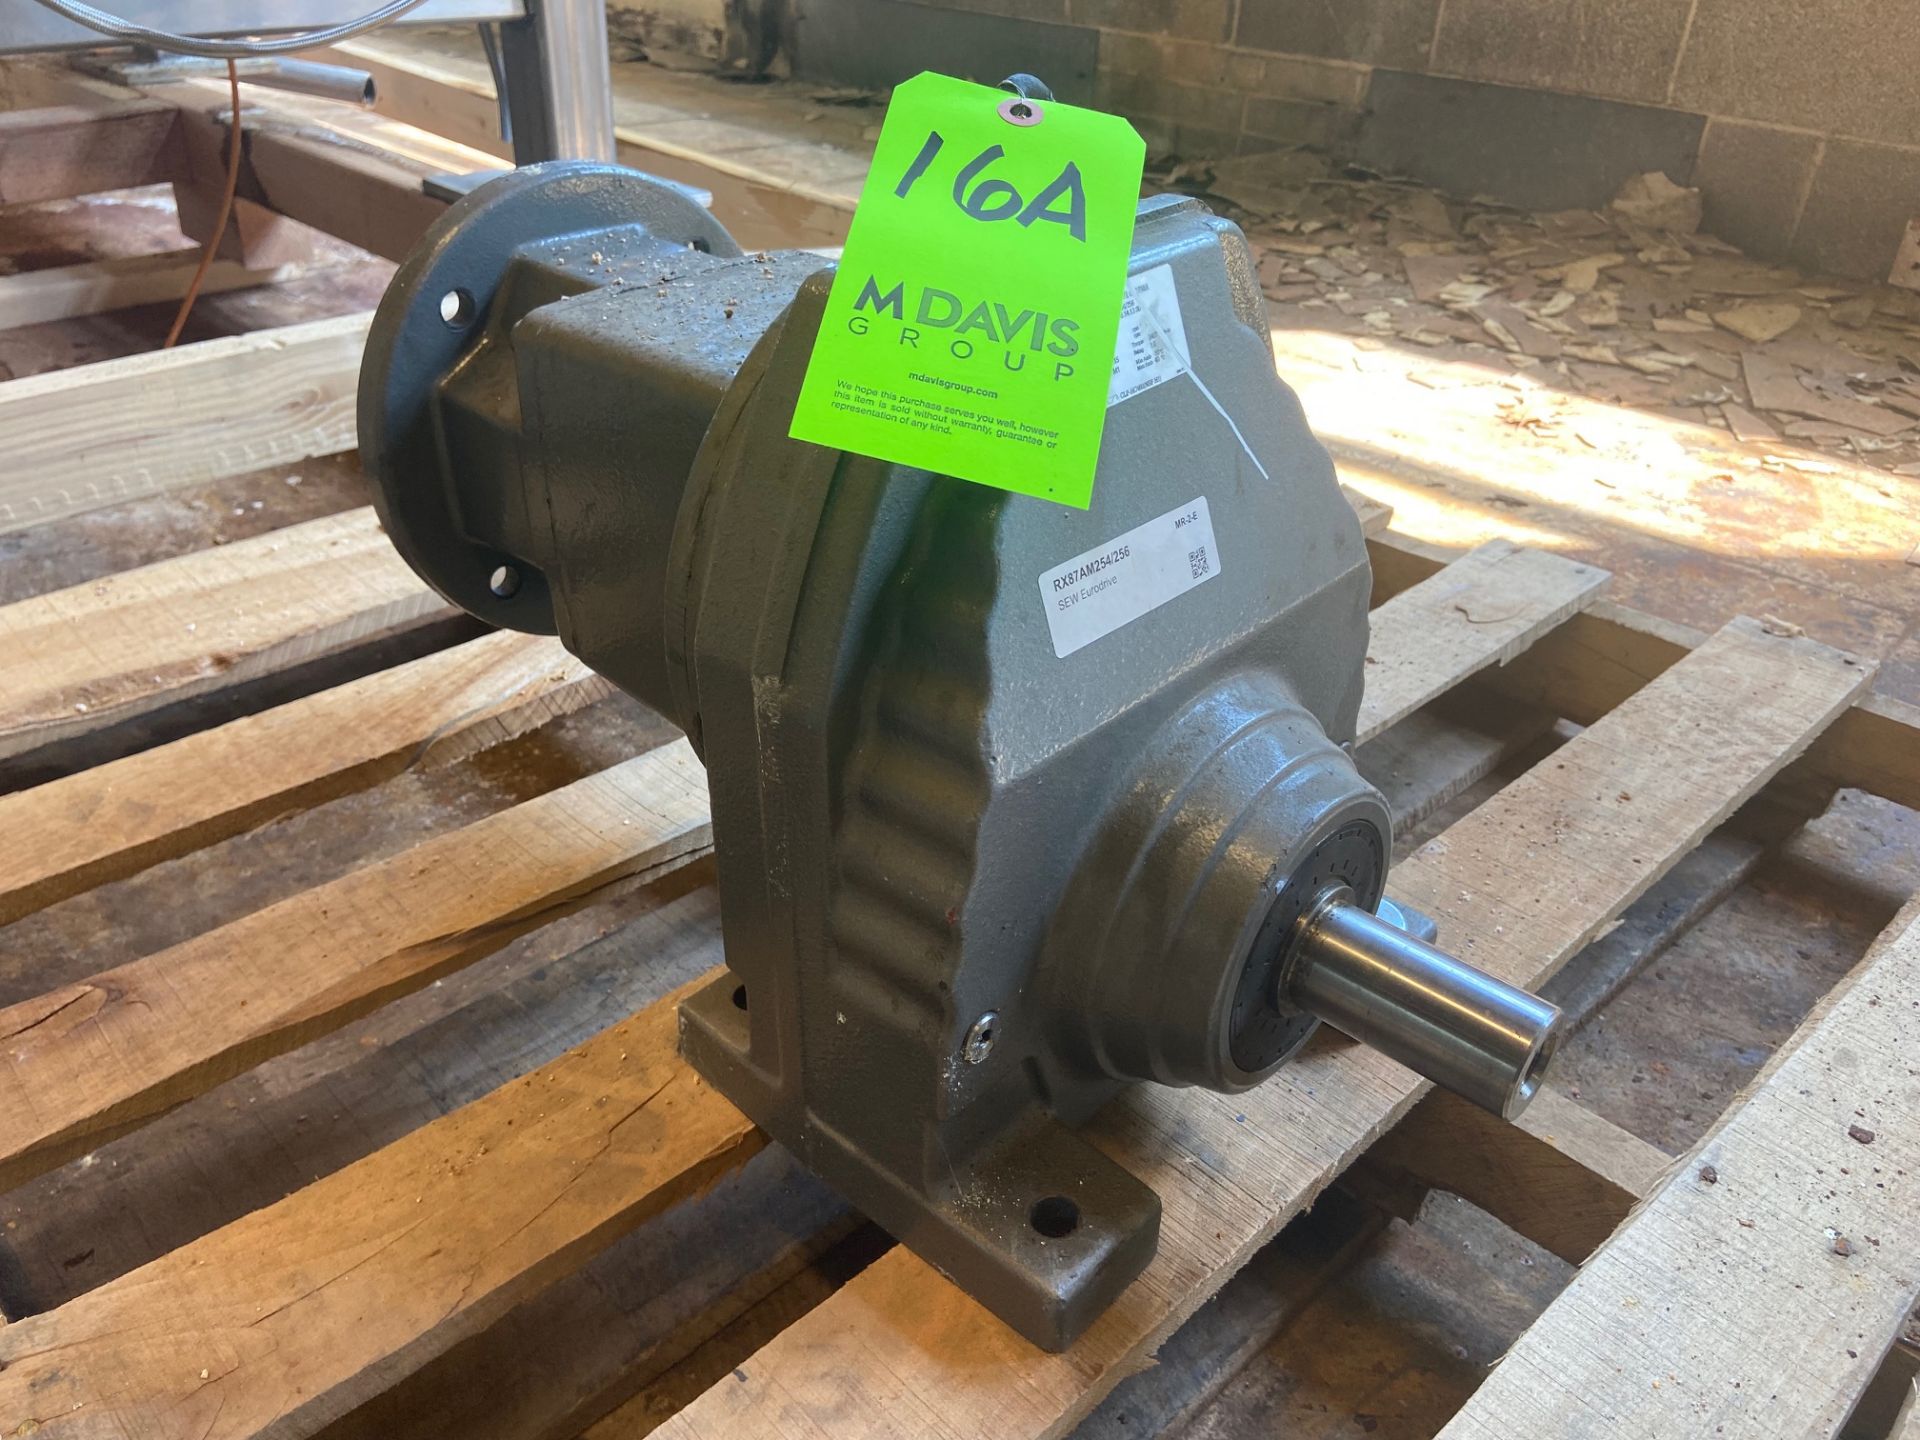 NEW SEW EURODRIVE GEAR DRIVE FOR AXIFLOW ST   90 PUMP, TYPE RX 87AM254/256, INPUT 1750, OUTPUT - Image 2 of 6